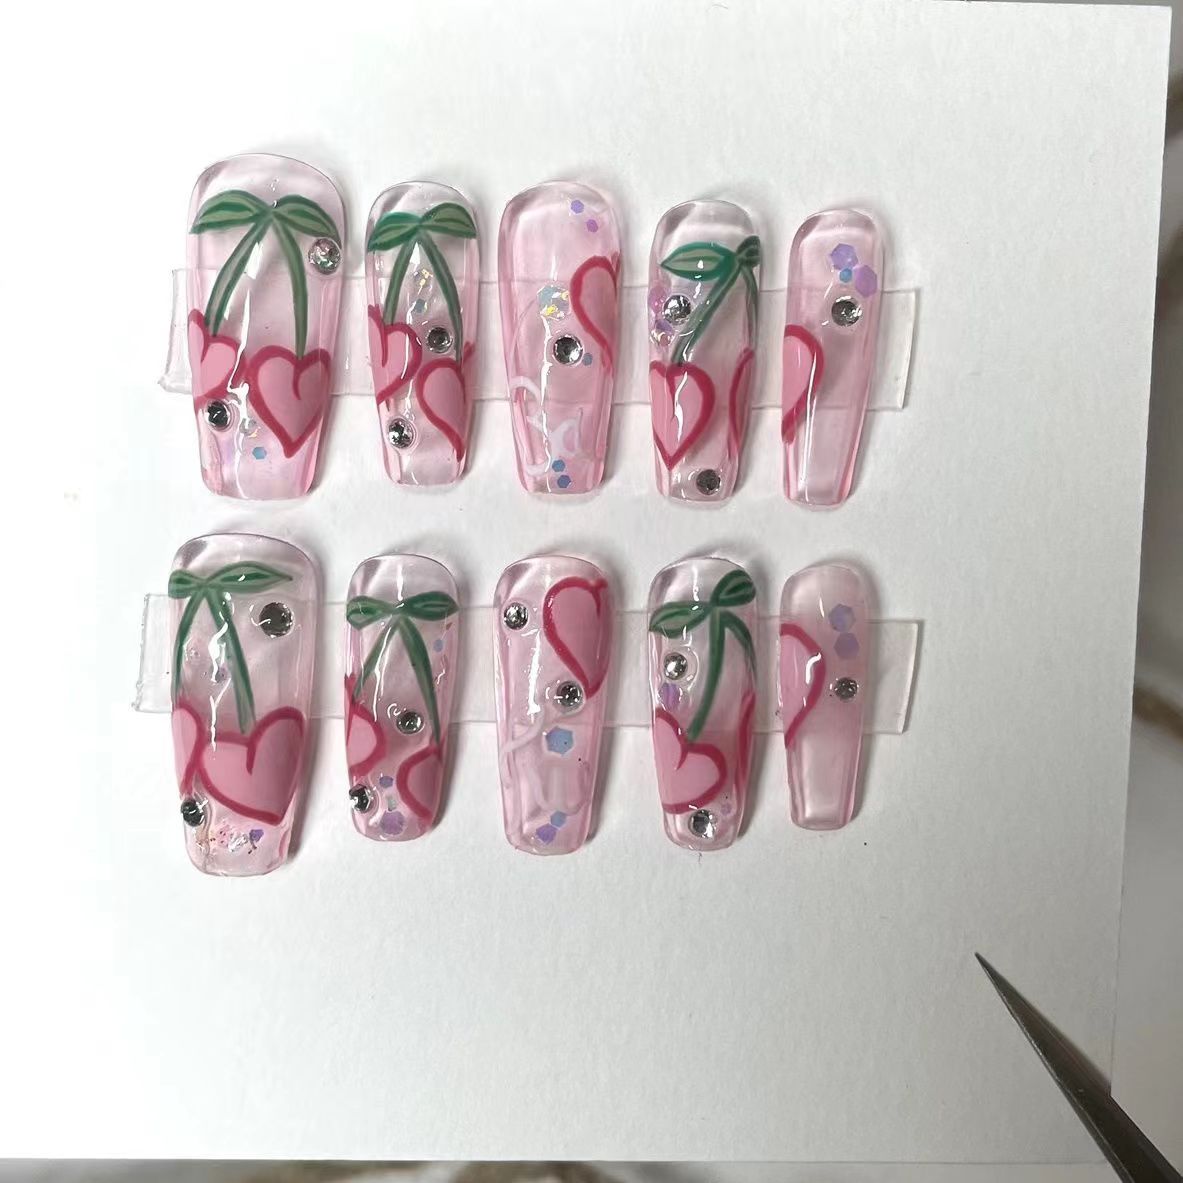 Water peach peach heart hand-painted girl heart handmade wear nail spicy girl sweet cool nail show white nail patch removable